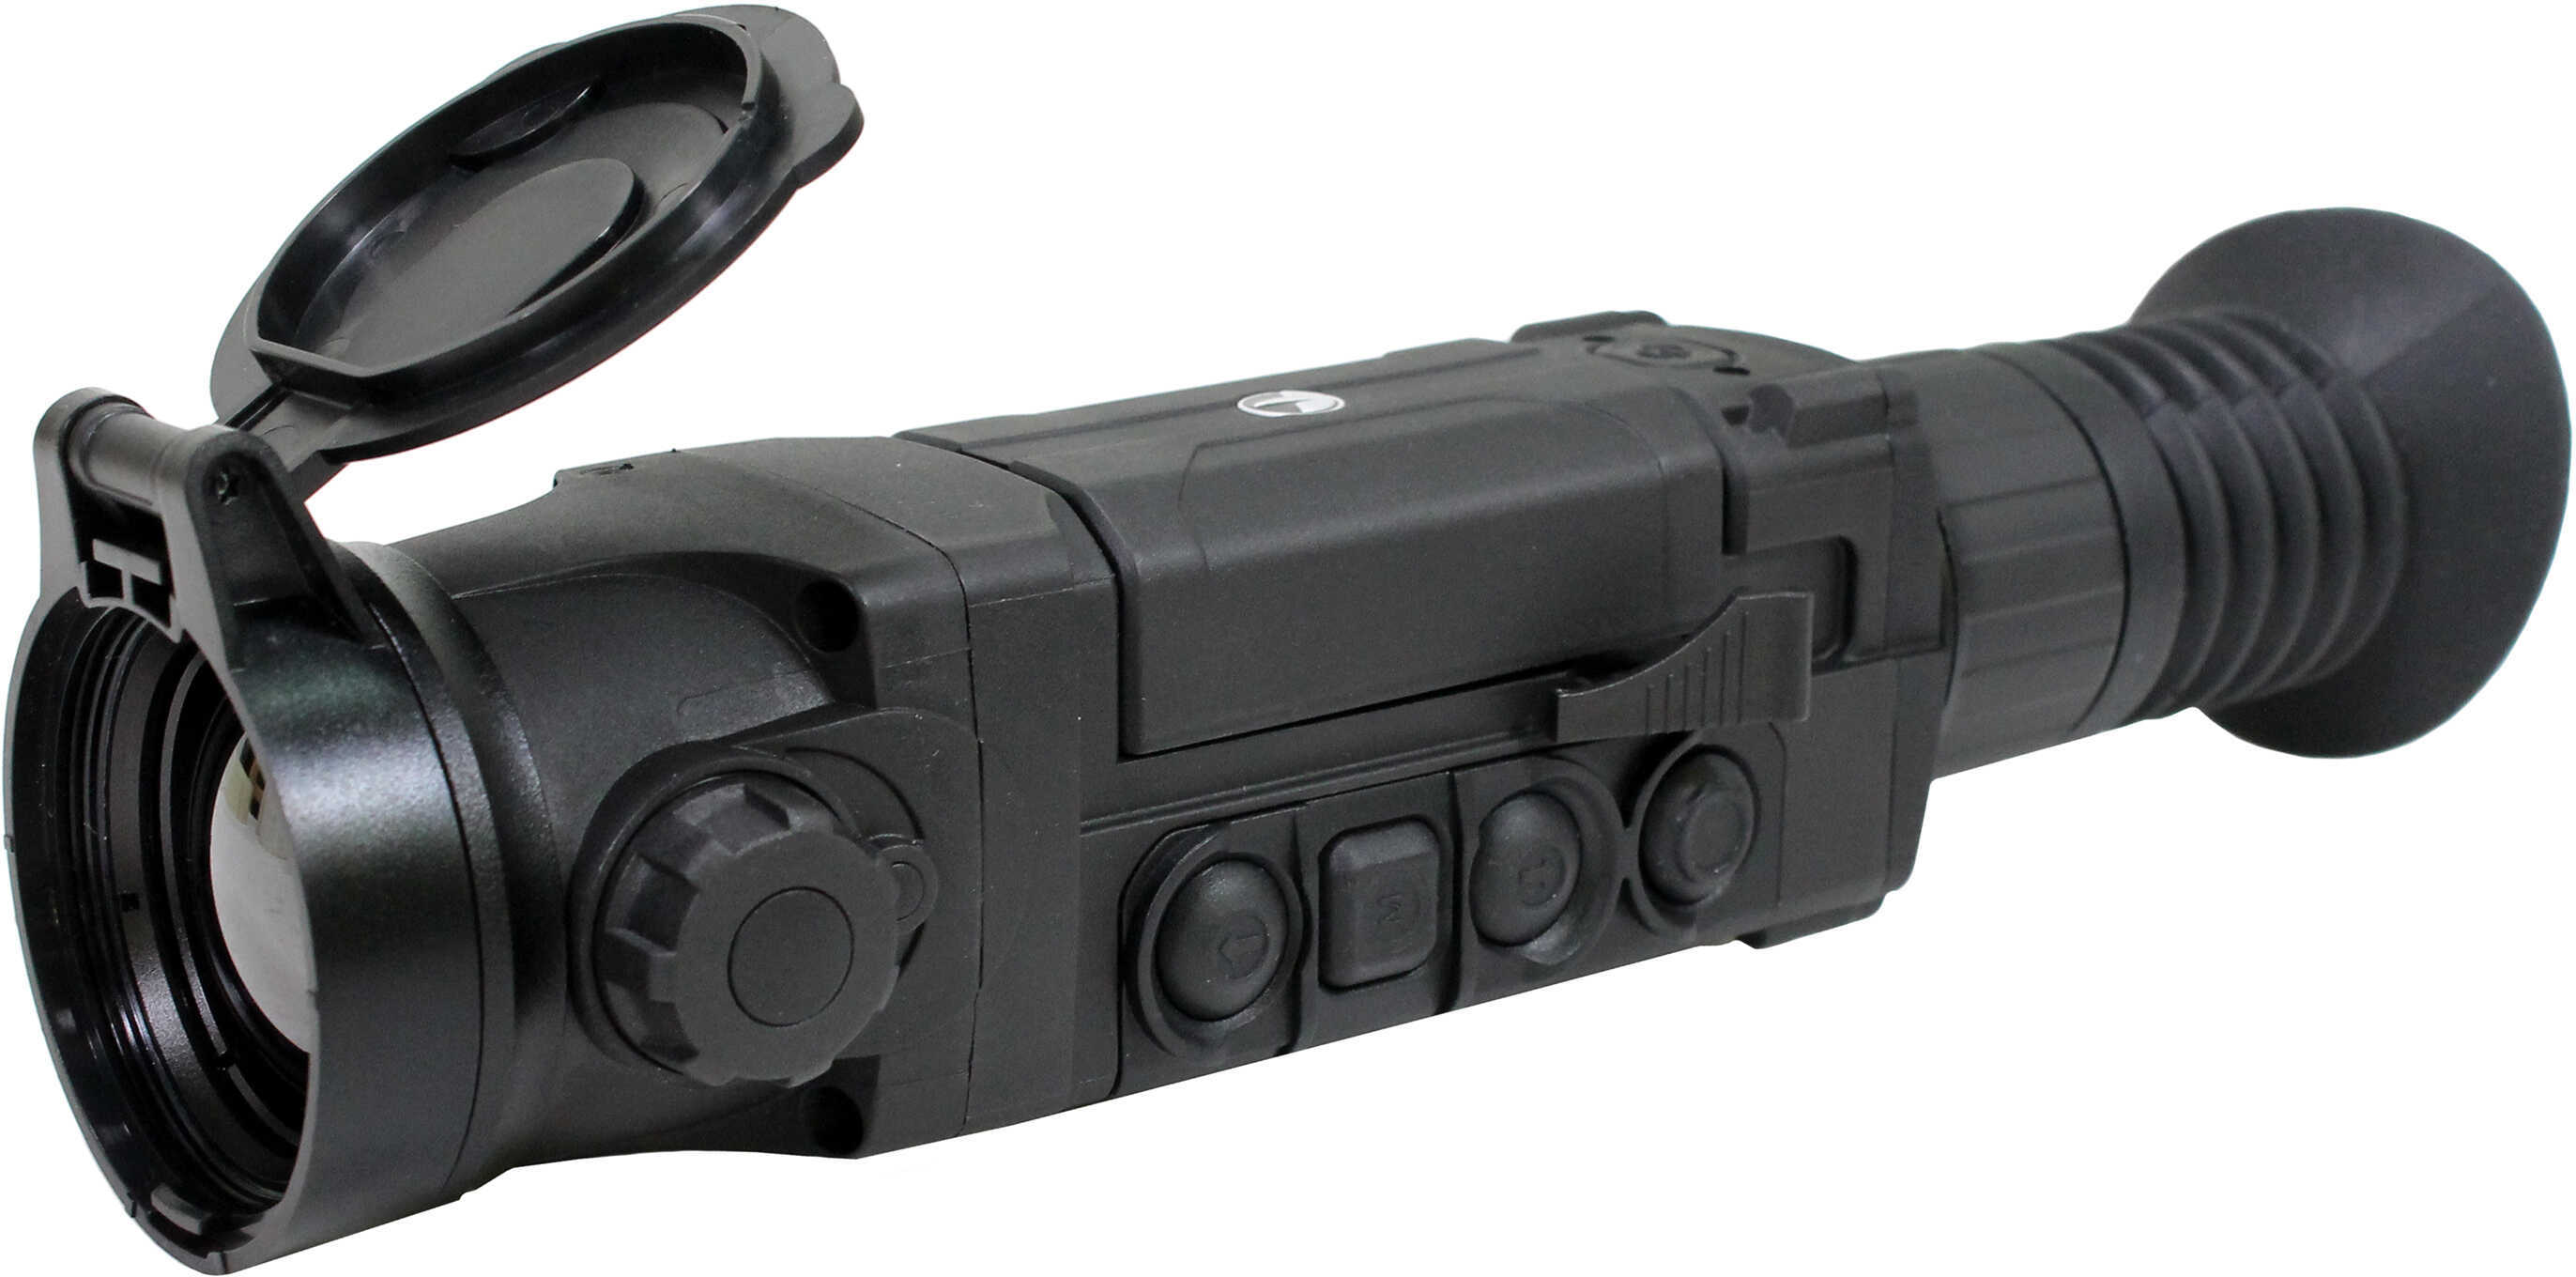 Thermal Imaging Scope Trail XP38 Md: PL76507Q